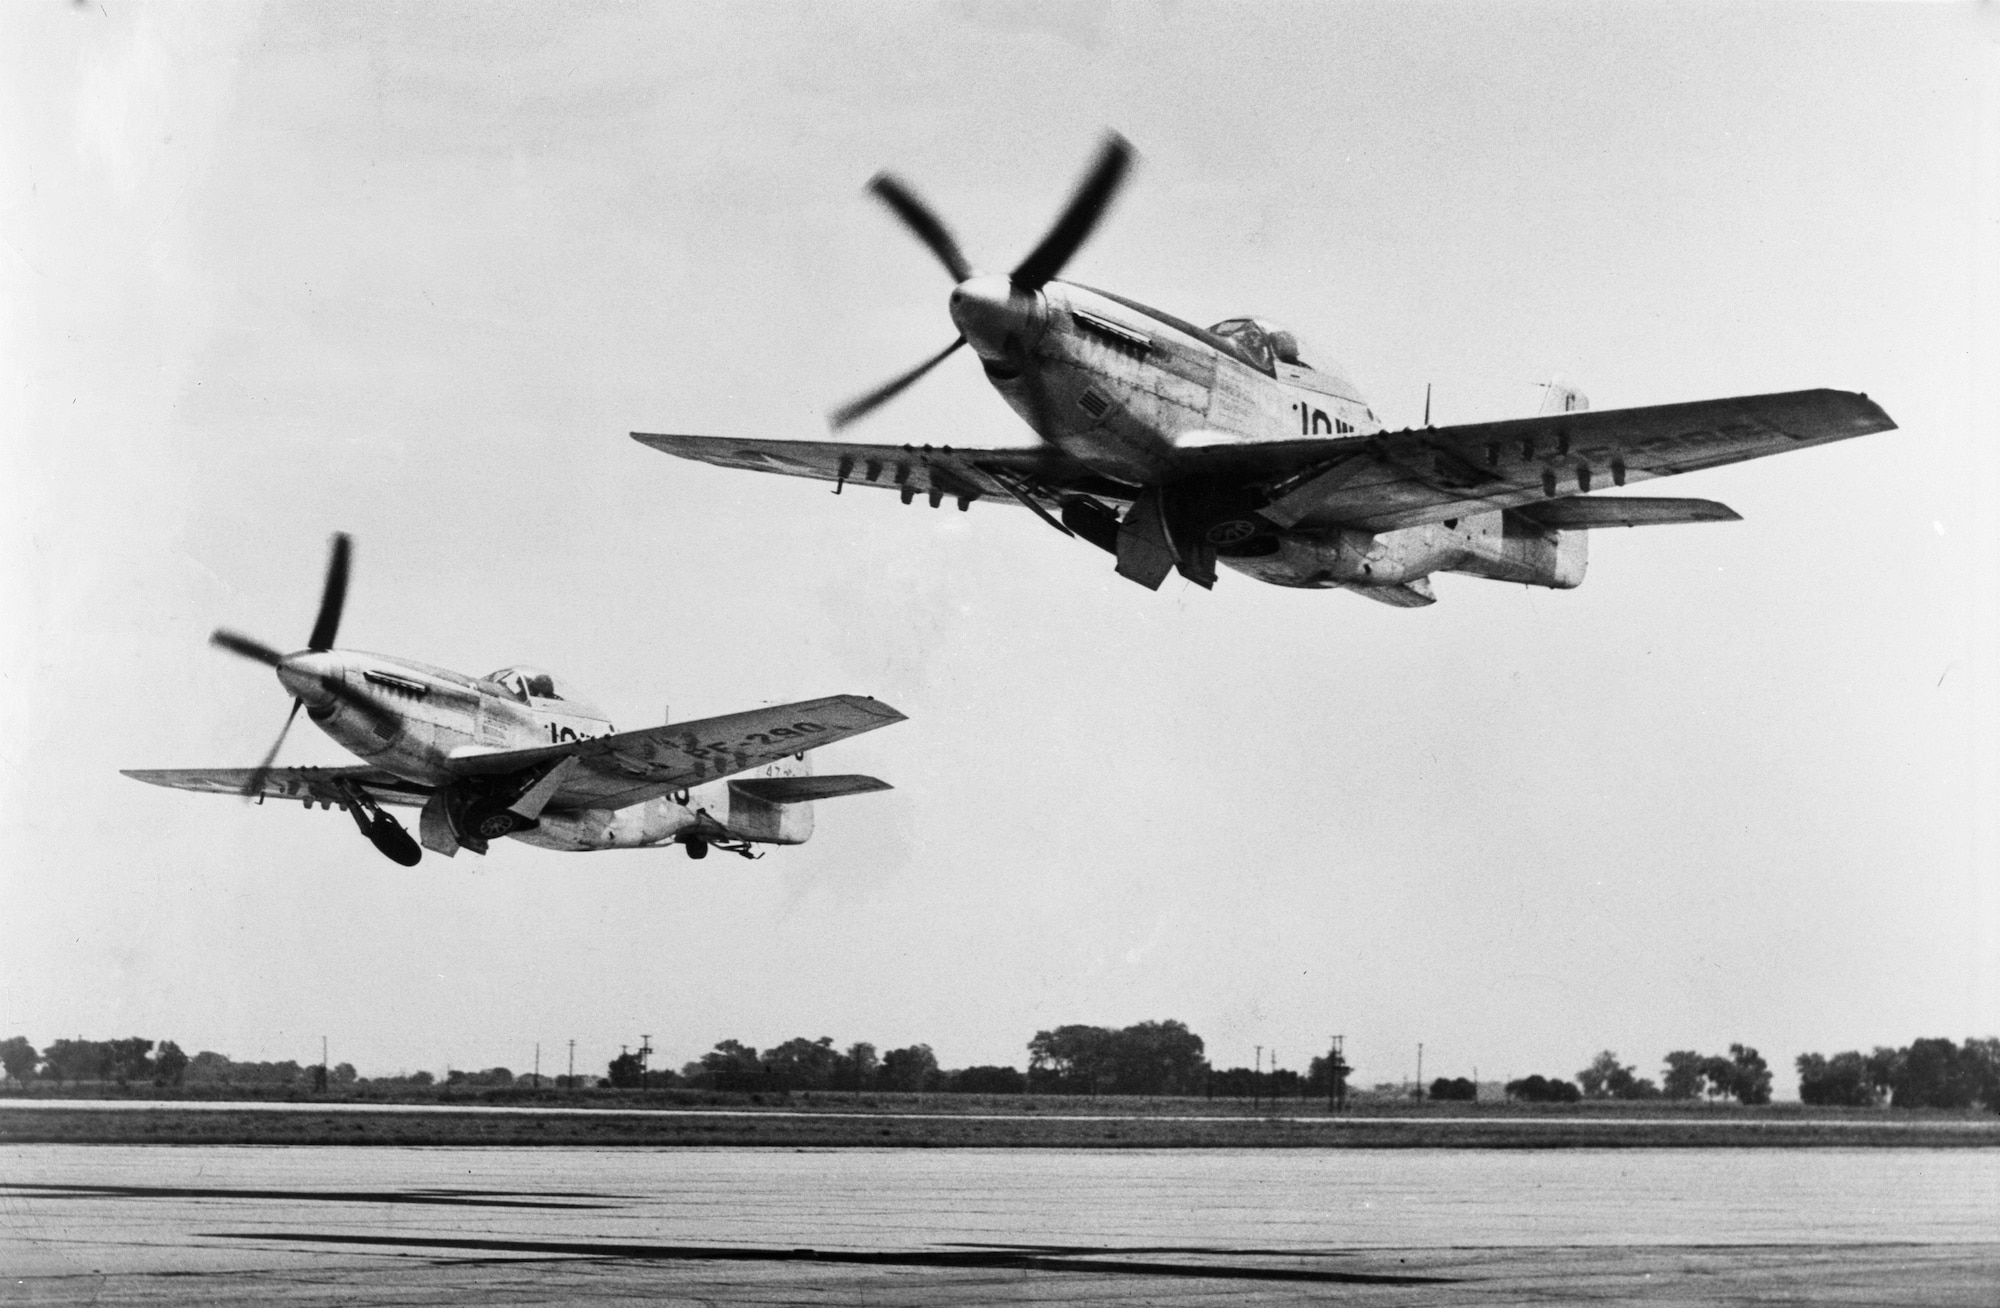 Two P-51 fighter aircraft assigned to the 174th Fighter Squadron, Iowa National Guard take off at the airport in Sioux City, Iowa in the spring of 1948. The Mustangs were the first aircraft assigned to the newly organized air arm of the Iowa National Guard when it was first organized in 1946.
185th ARW Photo/ Released
